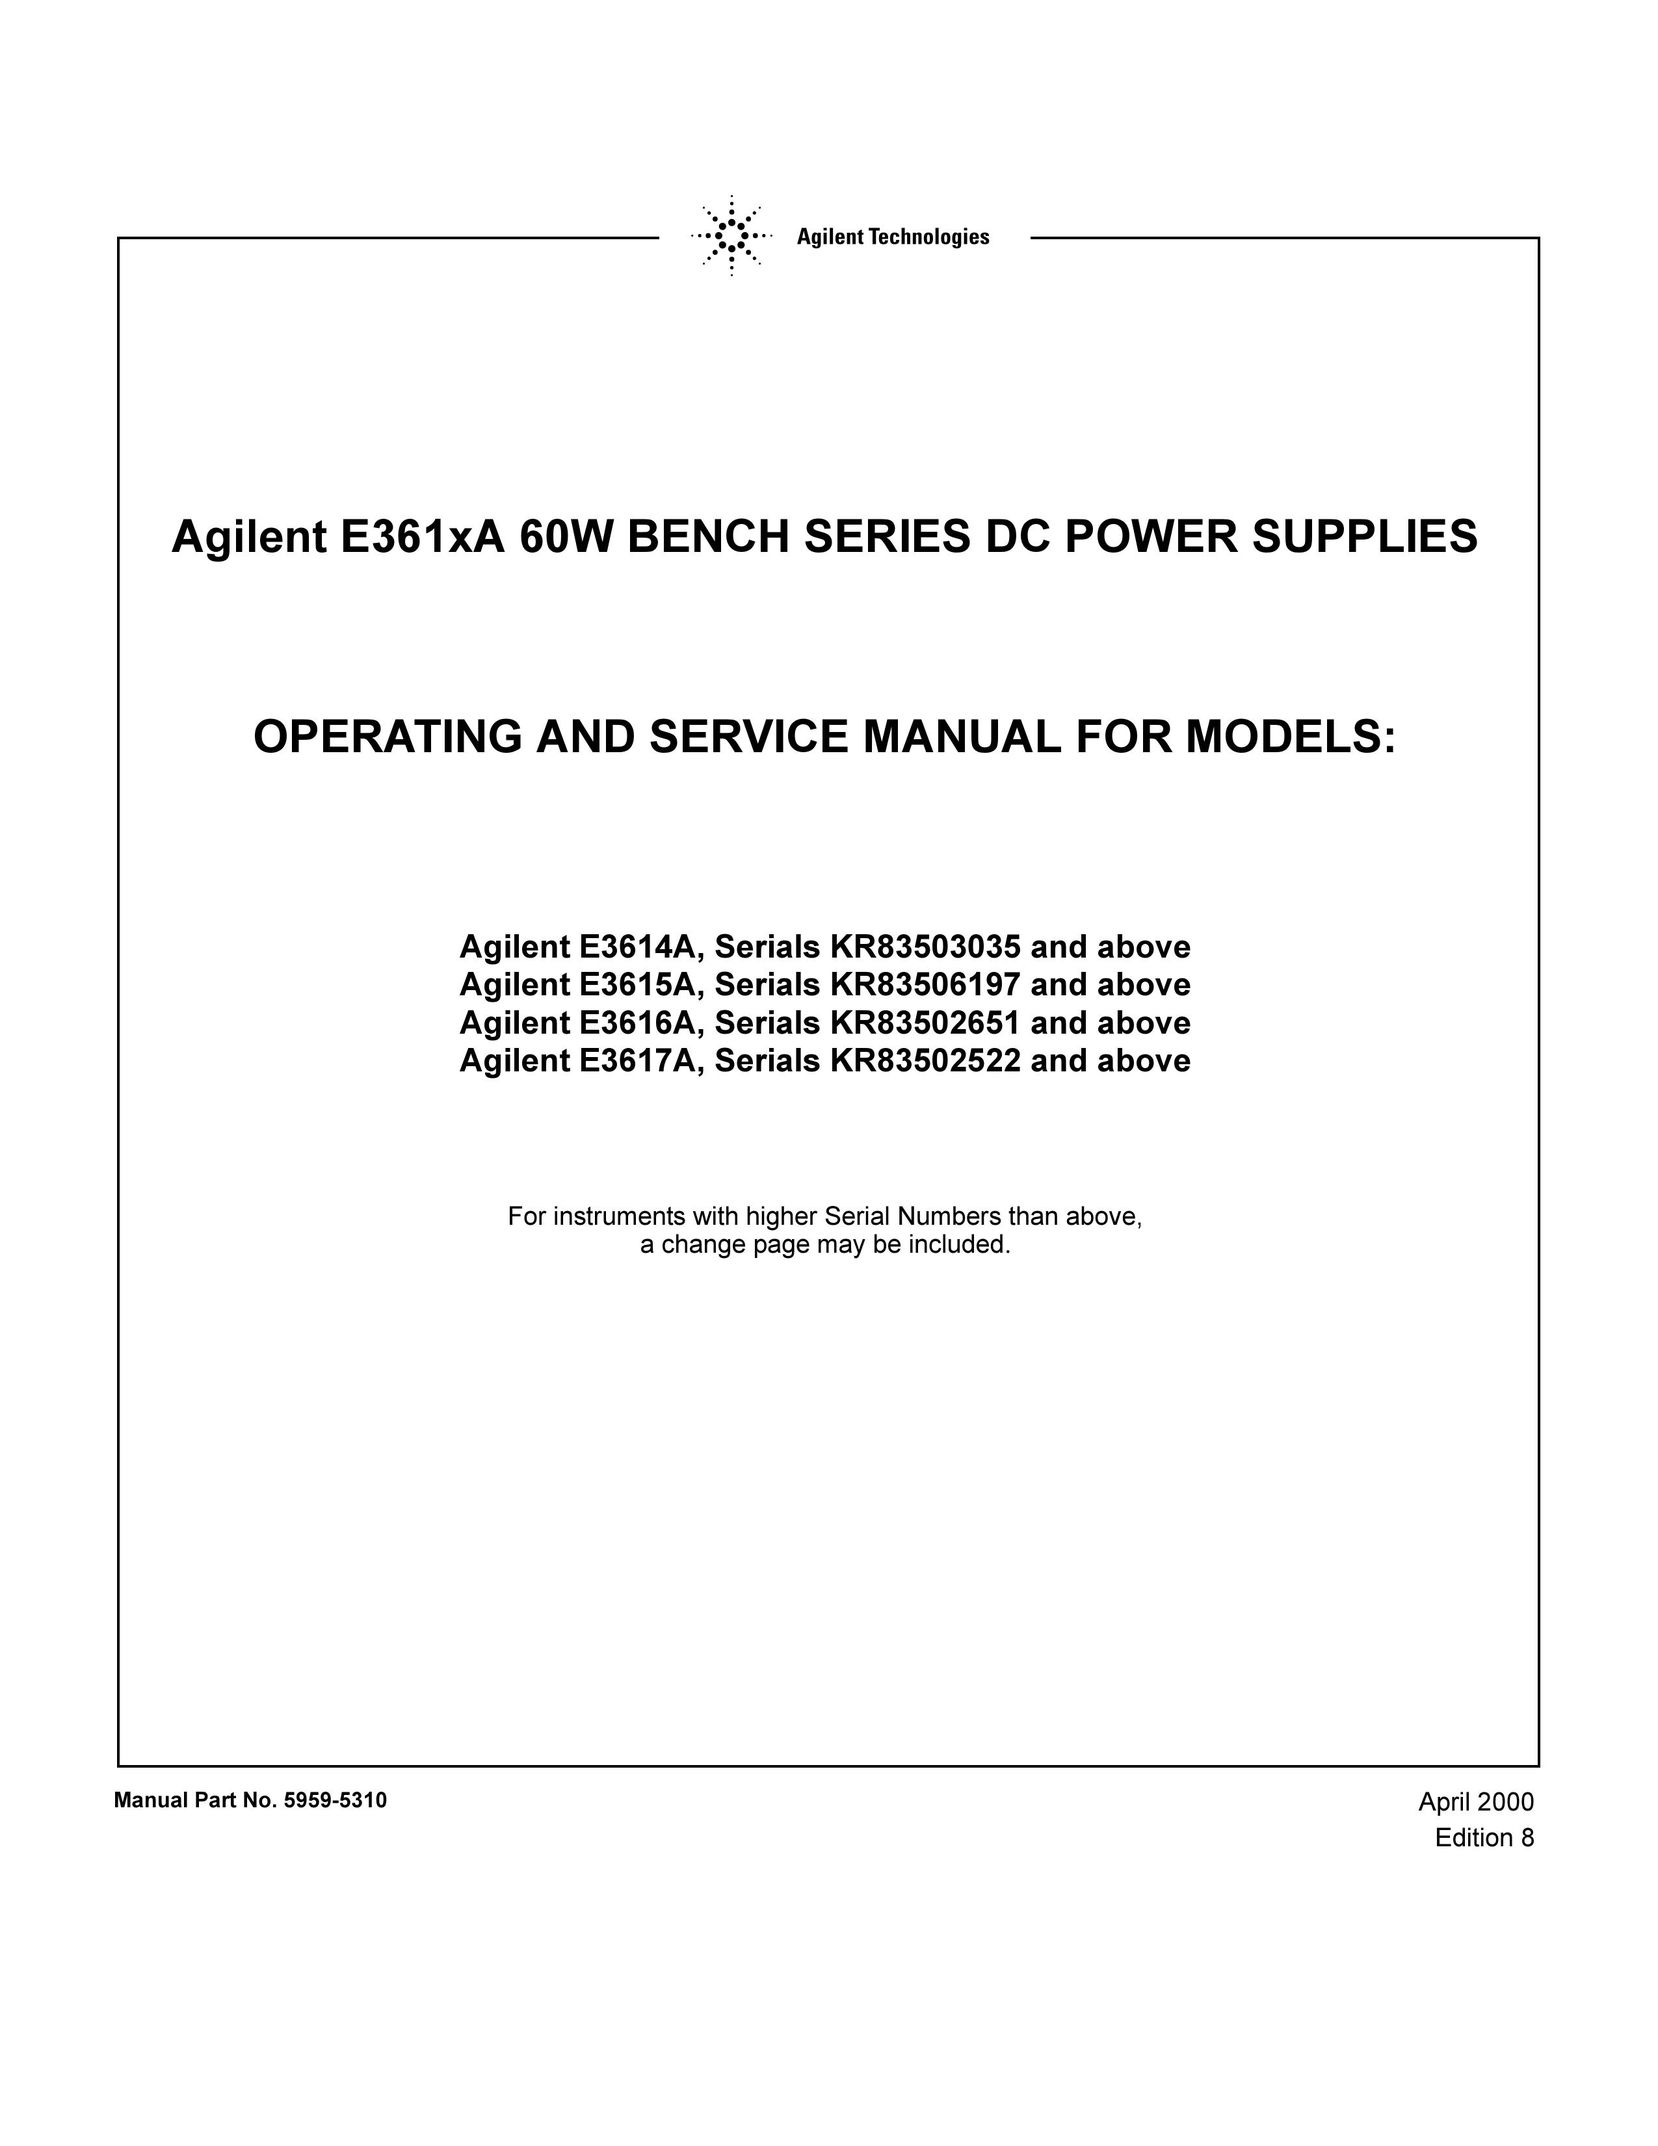 Agilent Technologies Agilent E3617A Serials KR83502522 Video Gaming Accessories User Manual (Page 1)